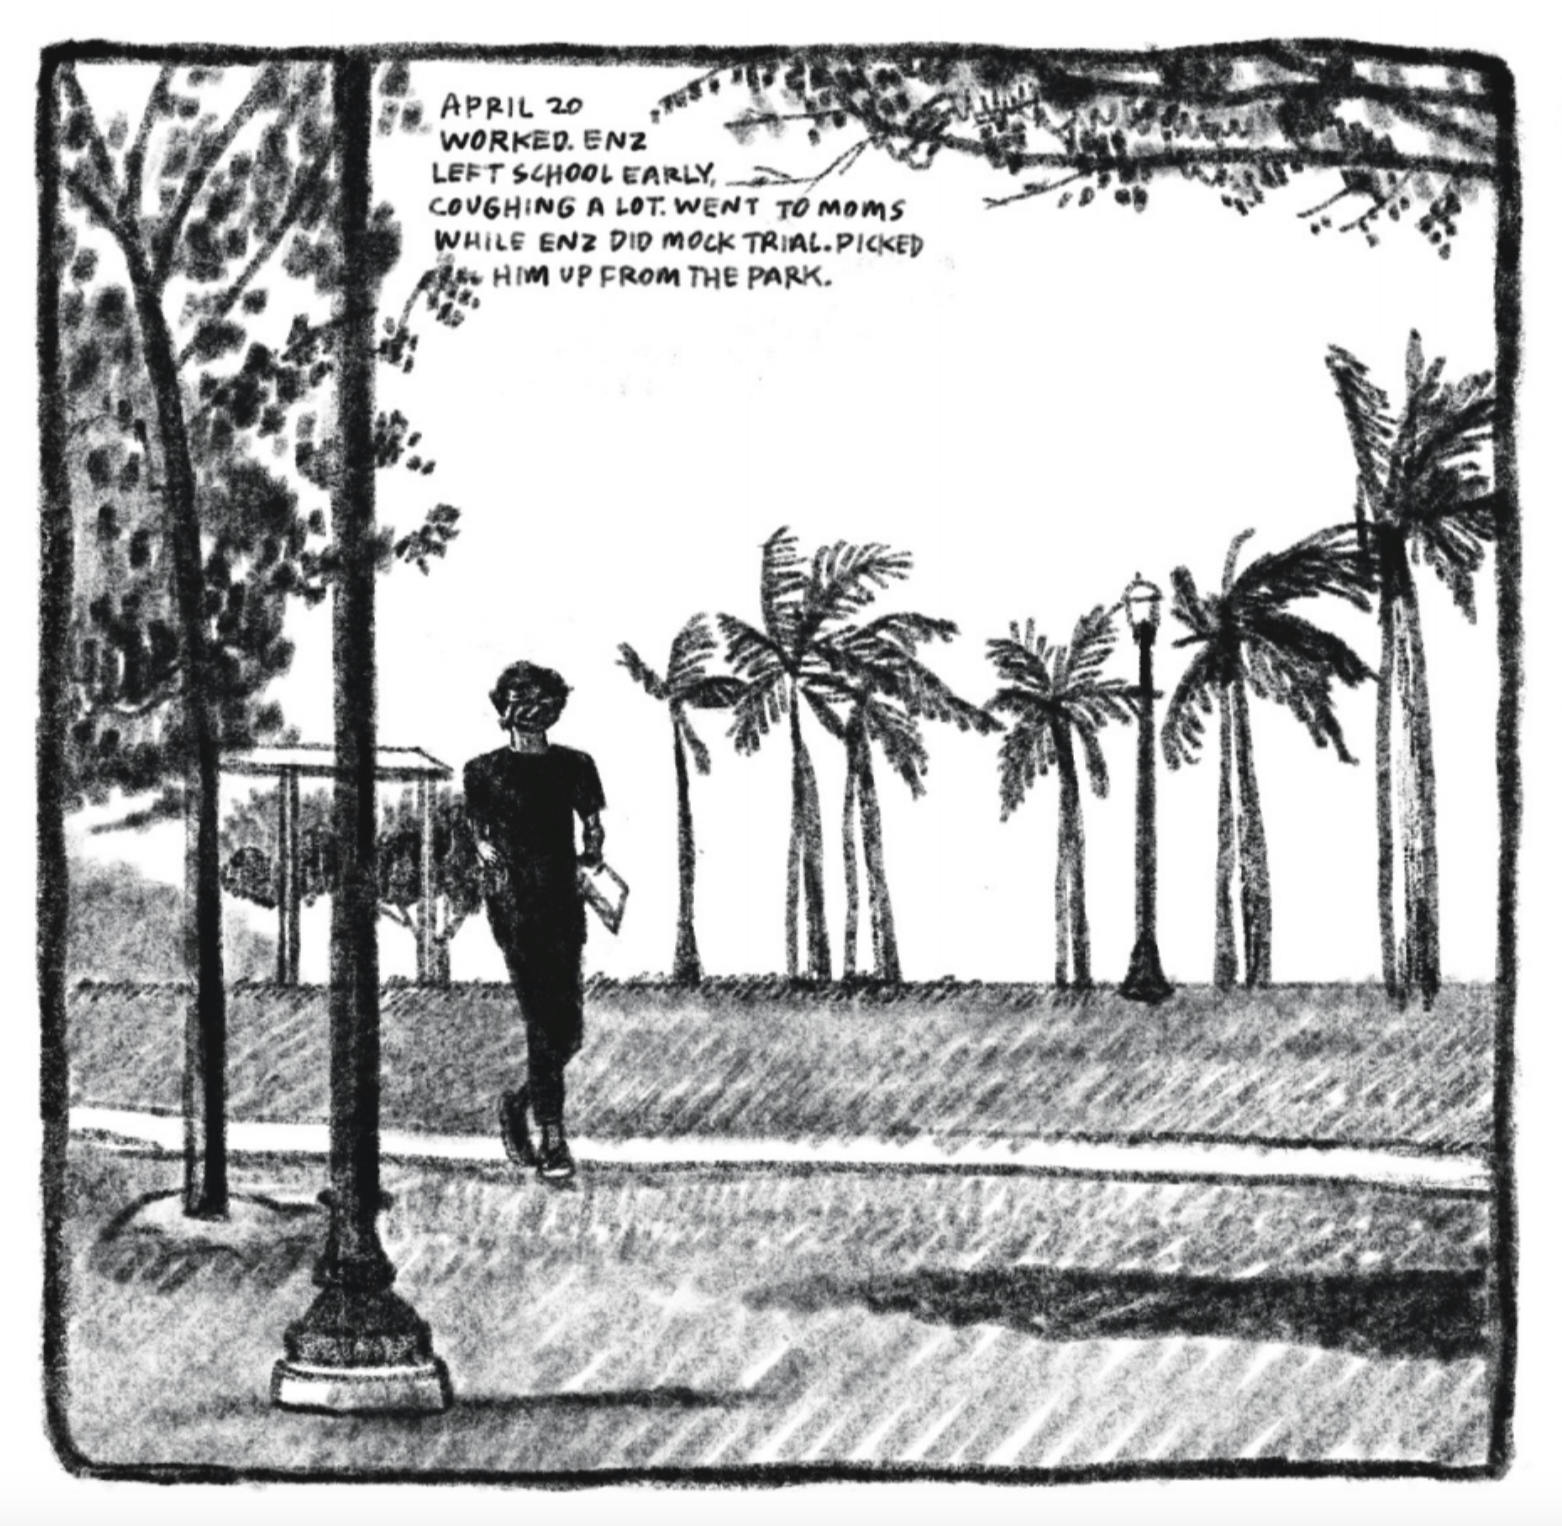 Enzo waits in a park for Kim to pick him up, on a strip of sidewalk surrounded by grass. He wears a t-shirt, jeans, and sneakers, all black or simply silhouetted. There are lamp posts and palm trees in the background. "April 20. Worked. Enz left school early, coughing a lot. Went to Mom's while Enz did mock trial. Picked him up from the park.